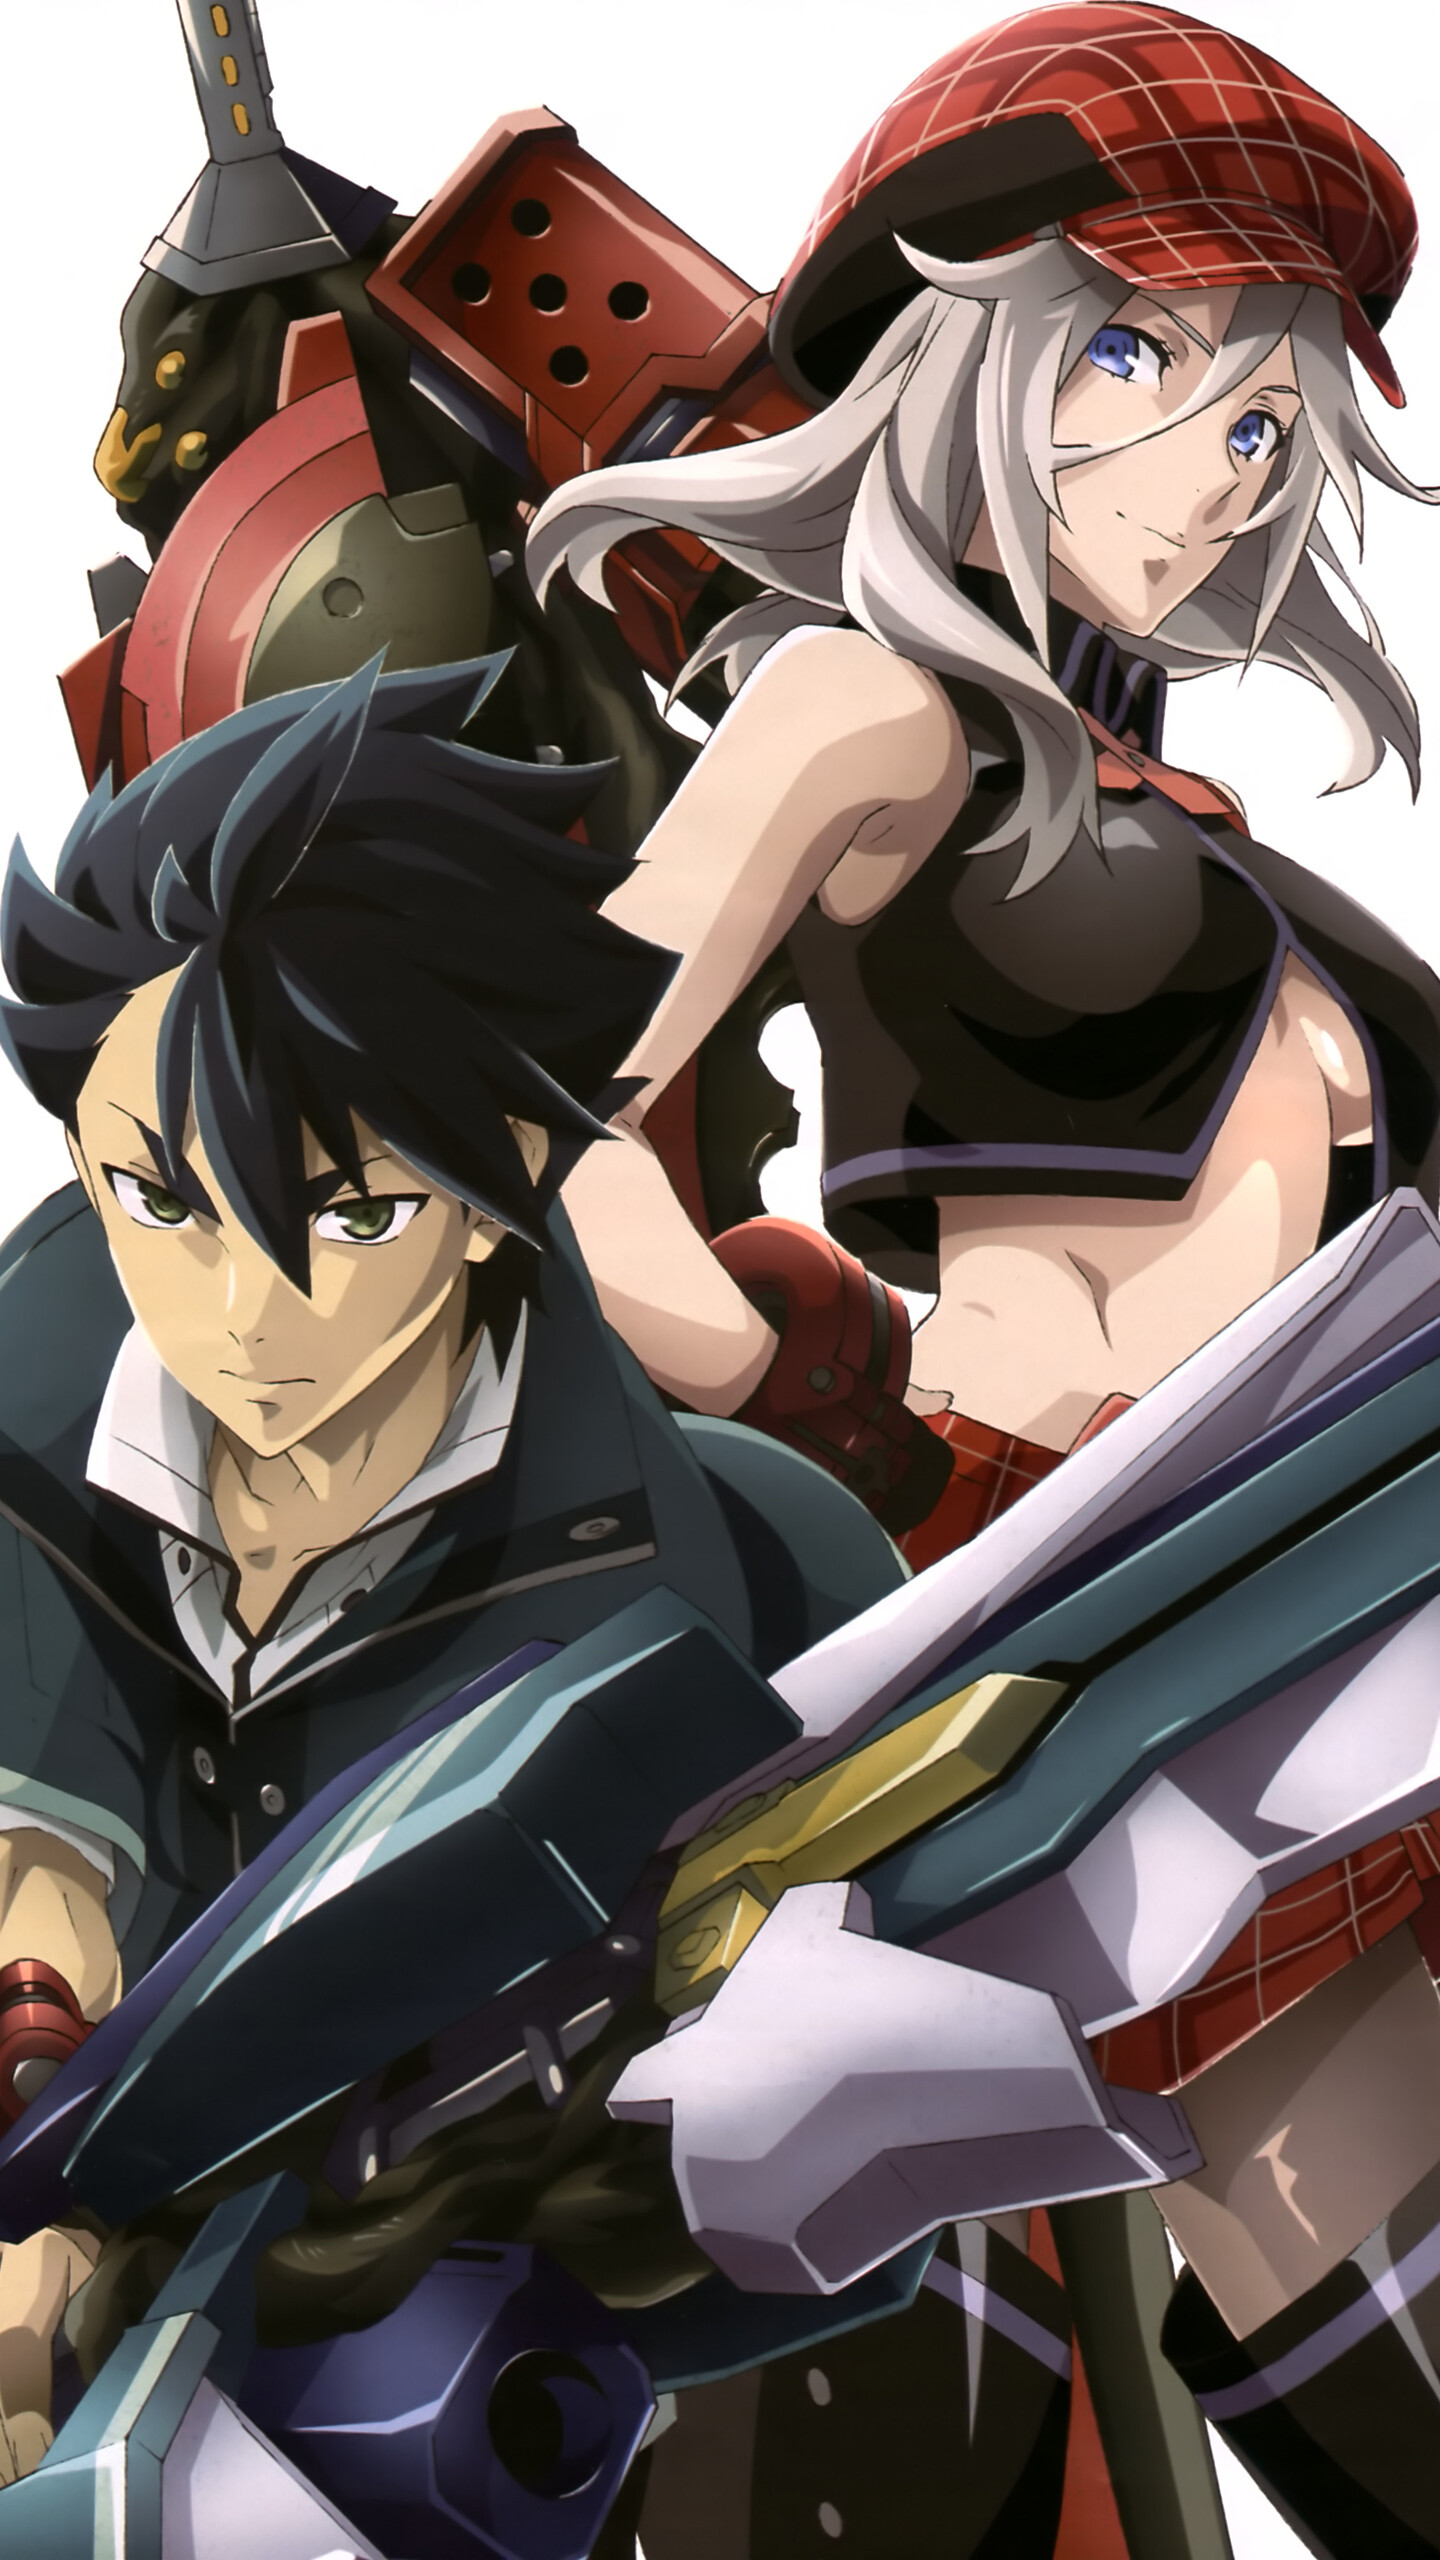 God Eater (TV series): Lenka Utsugi, An original character and main protagonist debuting in the anime series. 1440x2560 HD Background.